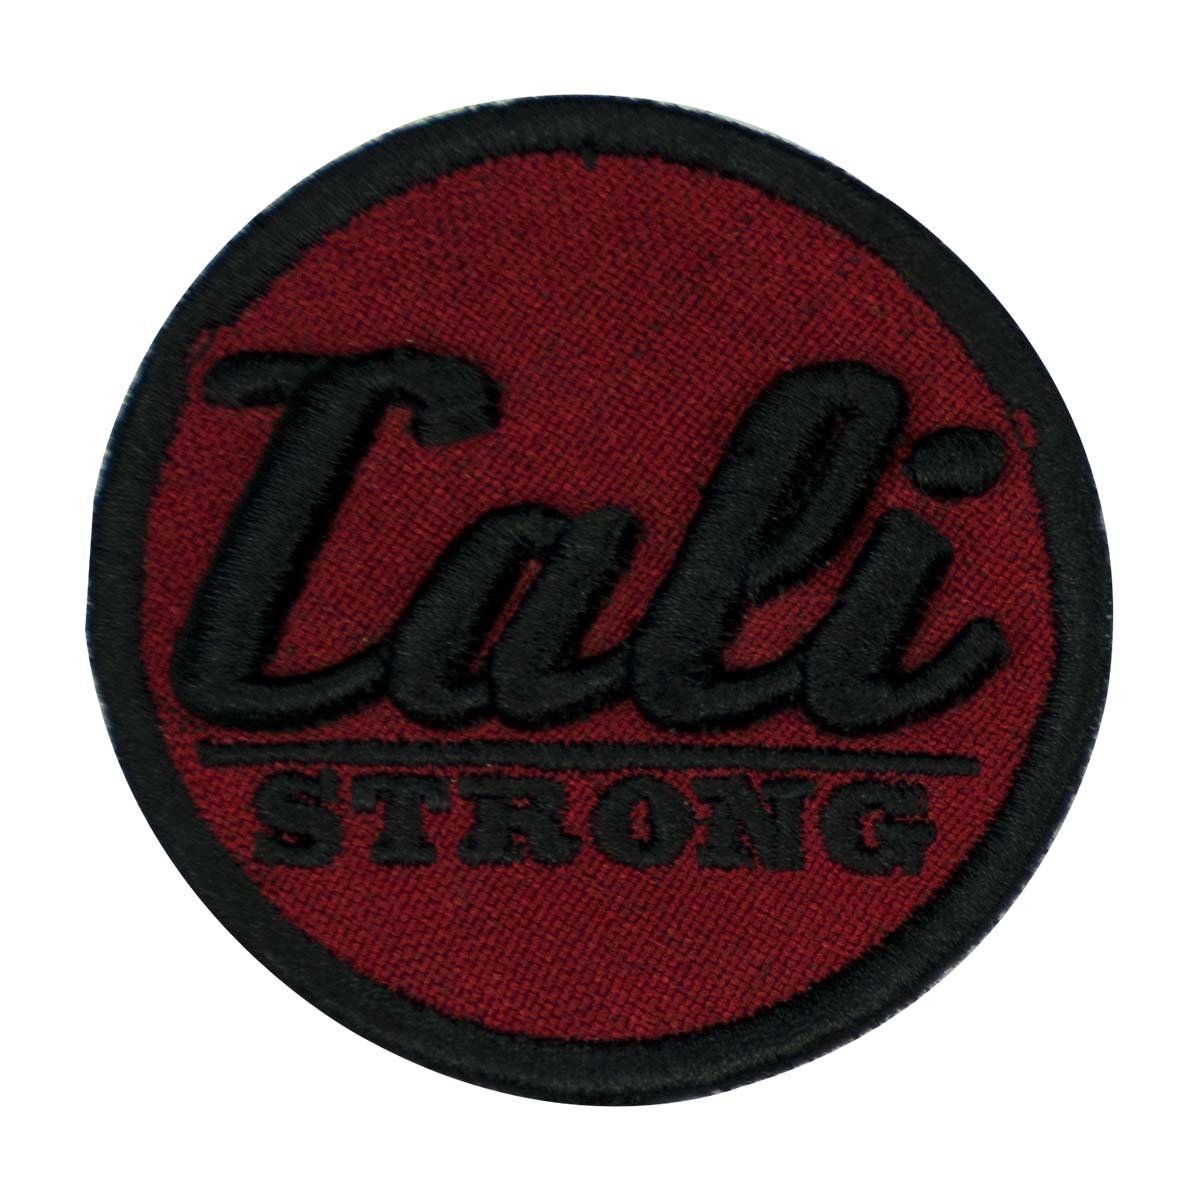 CALI Strong Black Maroon 3D Round Hook-and-Loop Morale Patch - Patches - Image 1 - CALI Strong